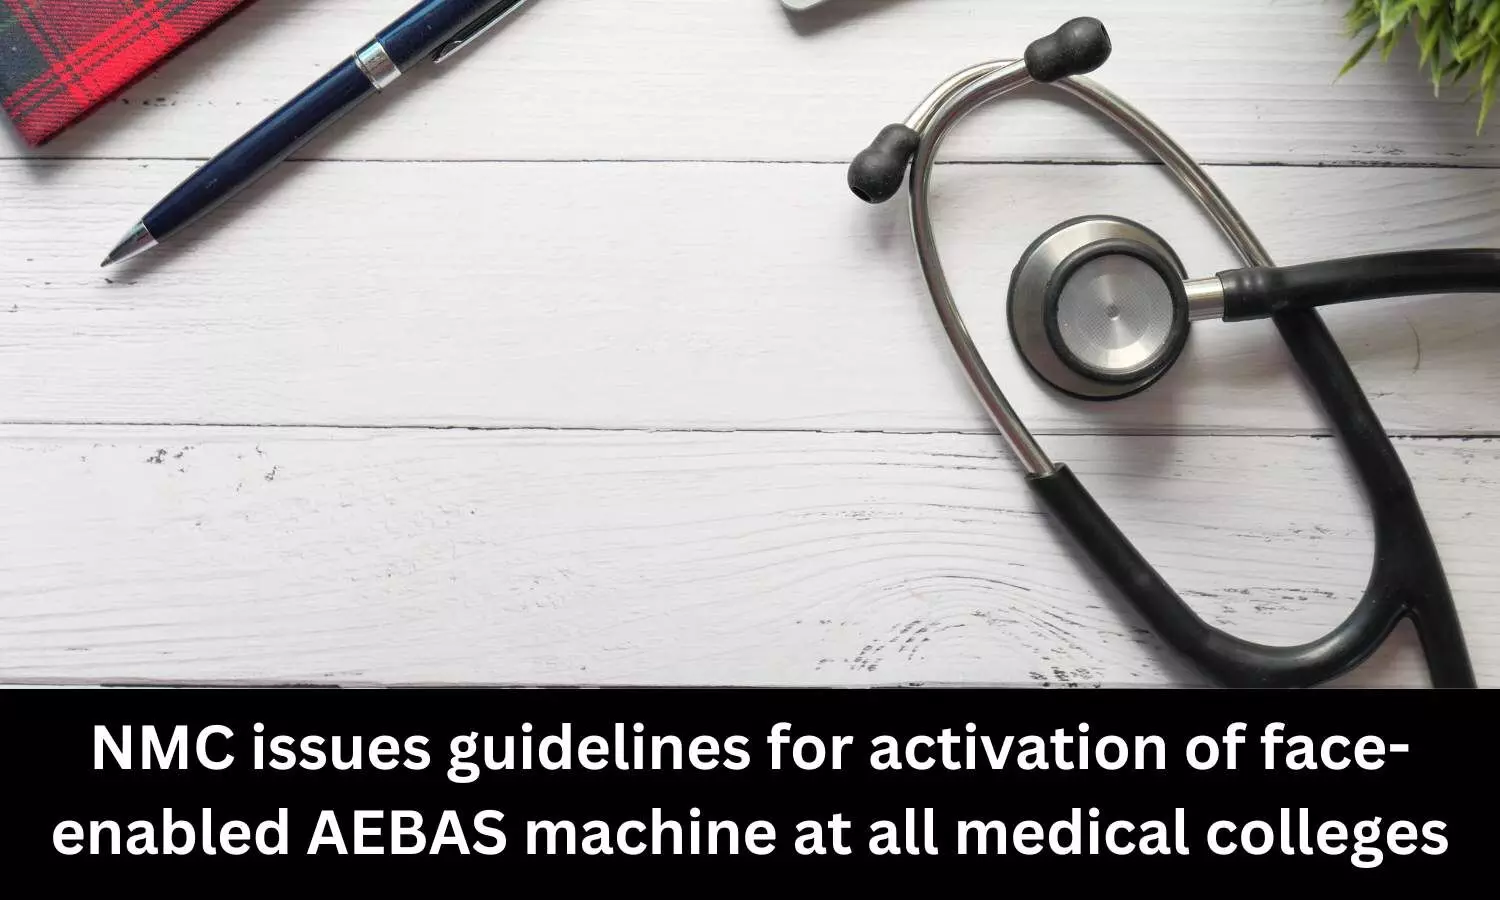 NMC releases guidelines for activation of face enabled AEBAS machine at all medical colleges